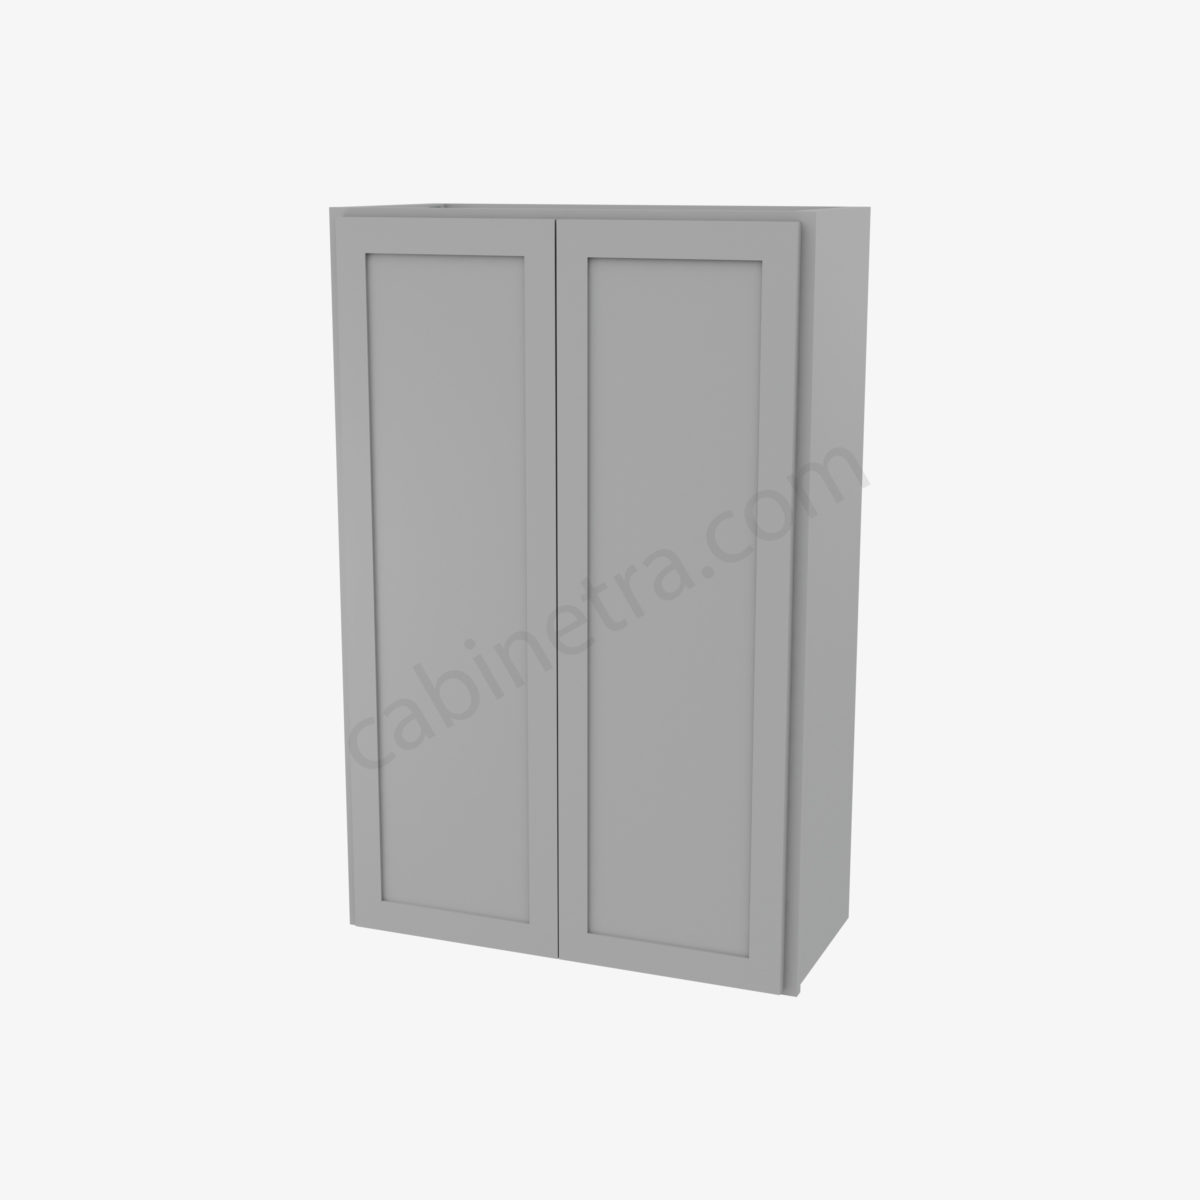 AB W2742B 0 Forevermark Lait Gray Shaker Cabinetra scaled